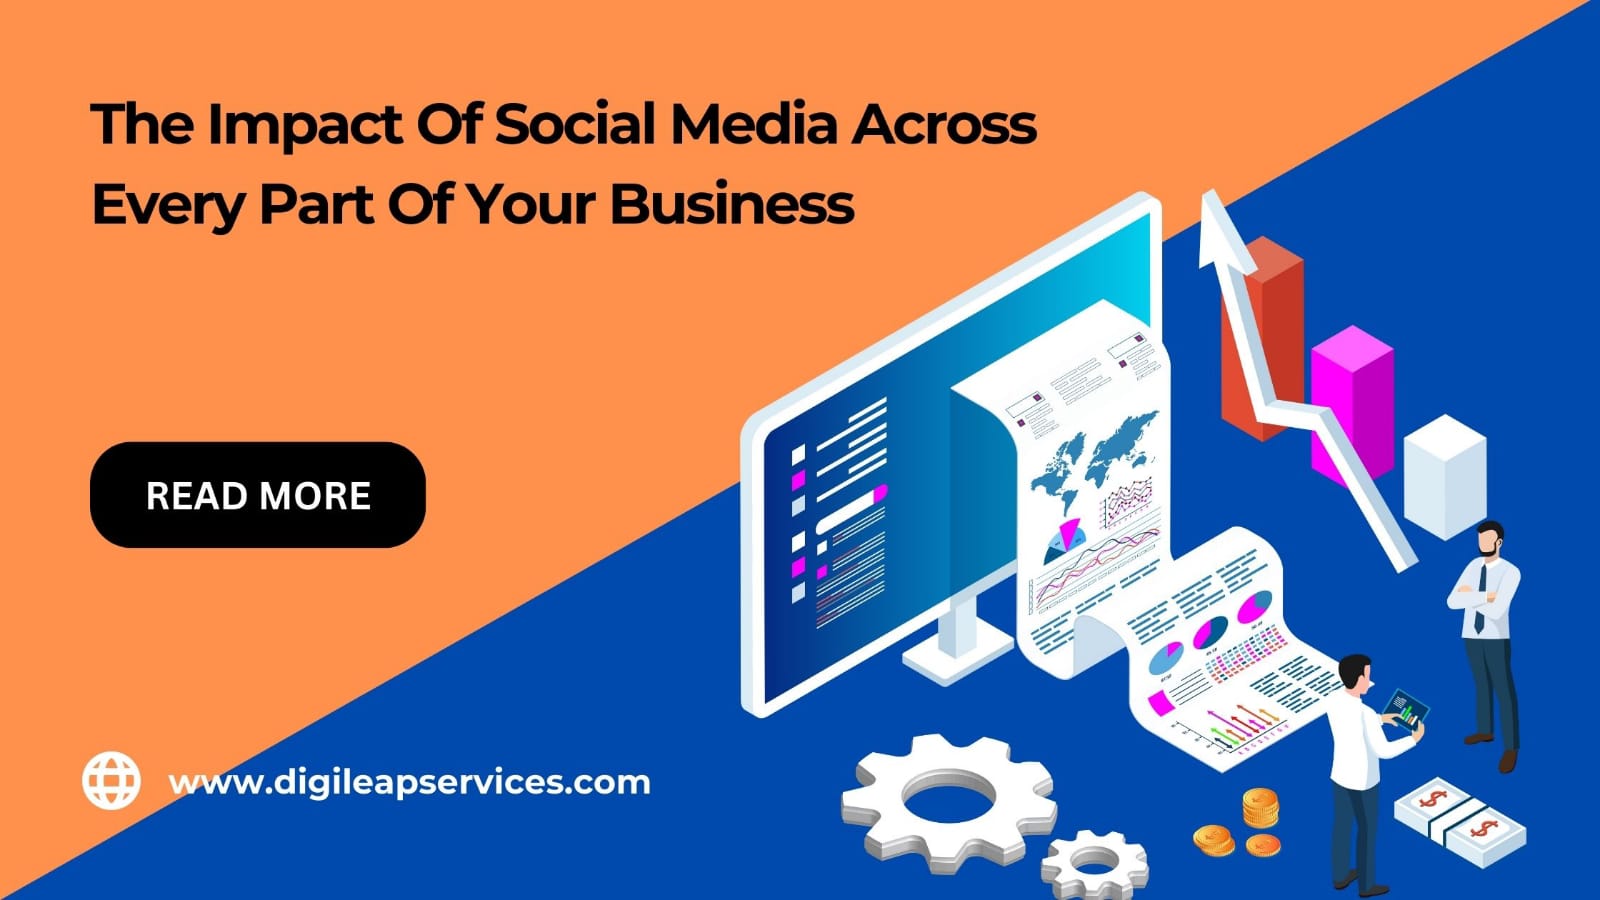 The impact of Social Media Across Every Part of Your Business